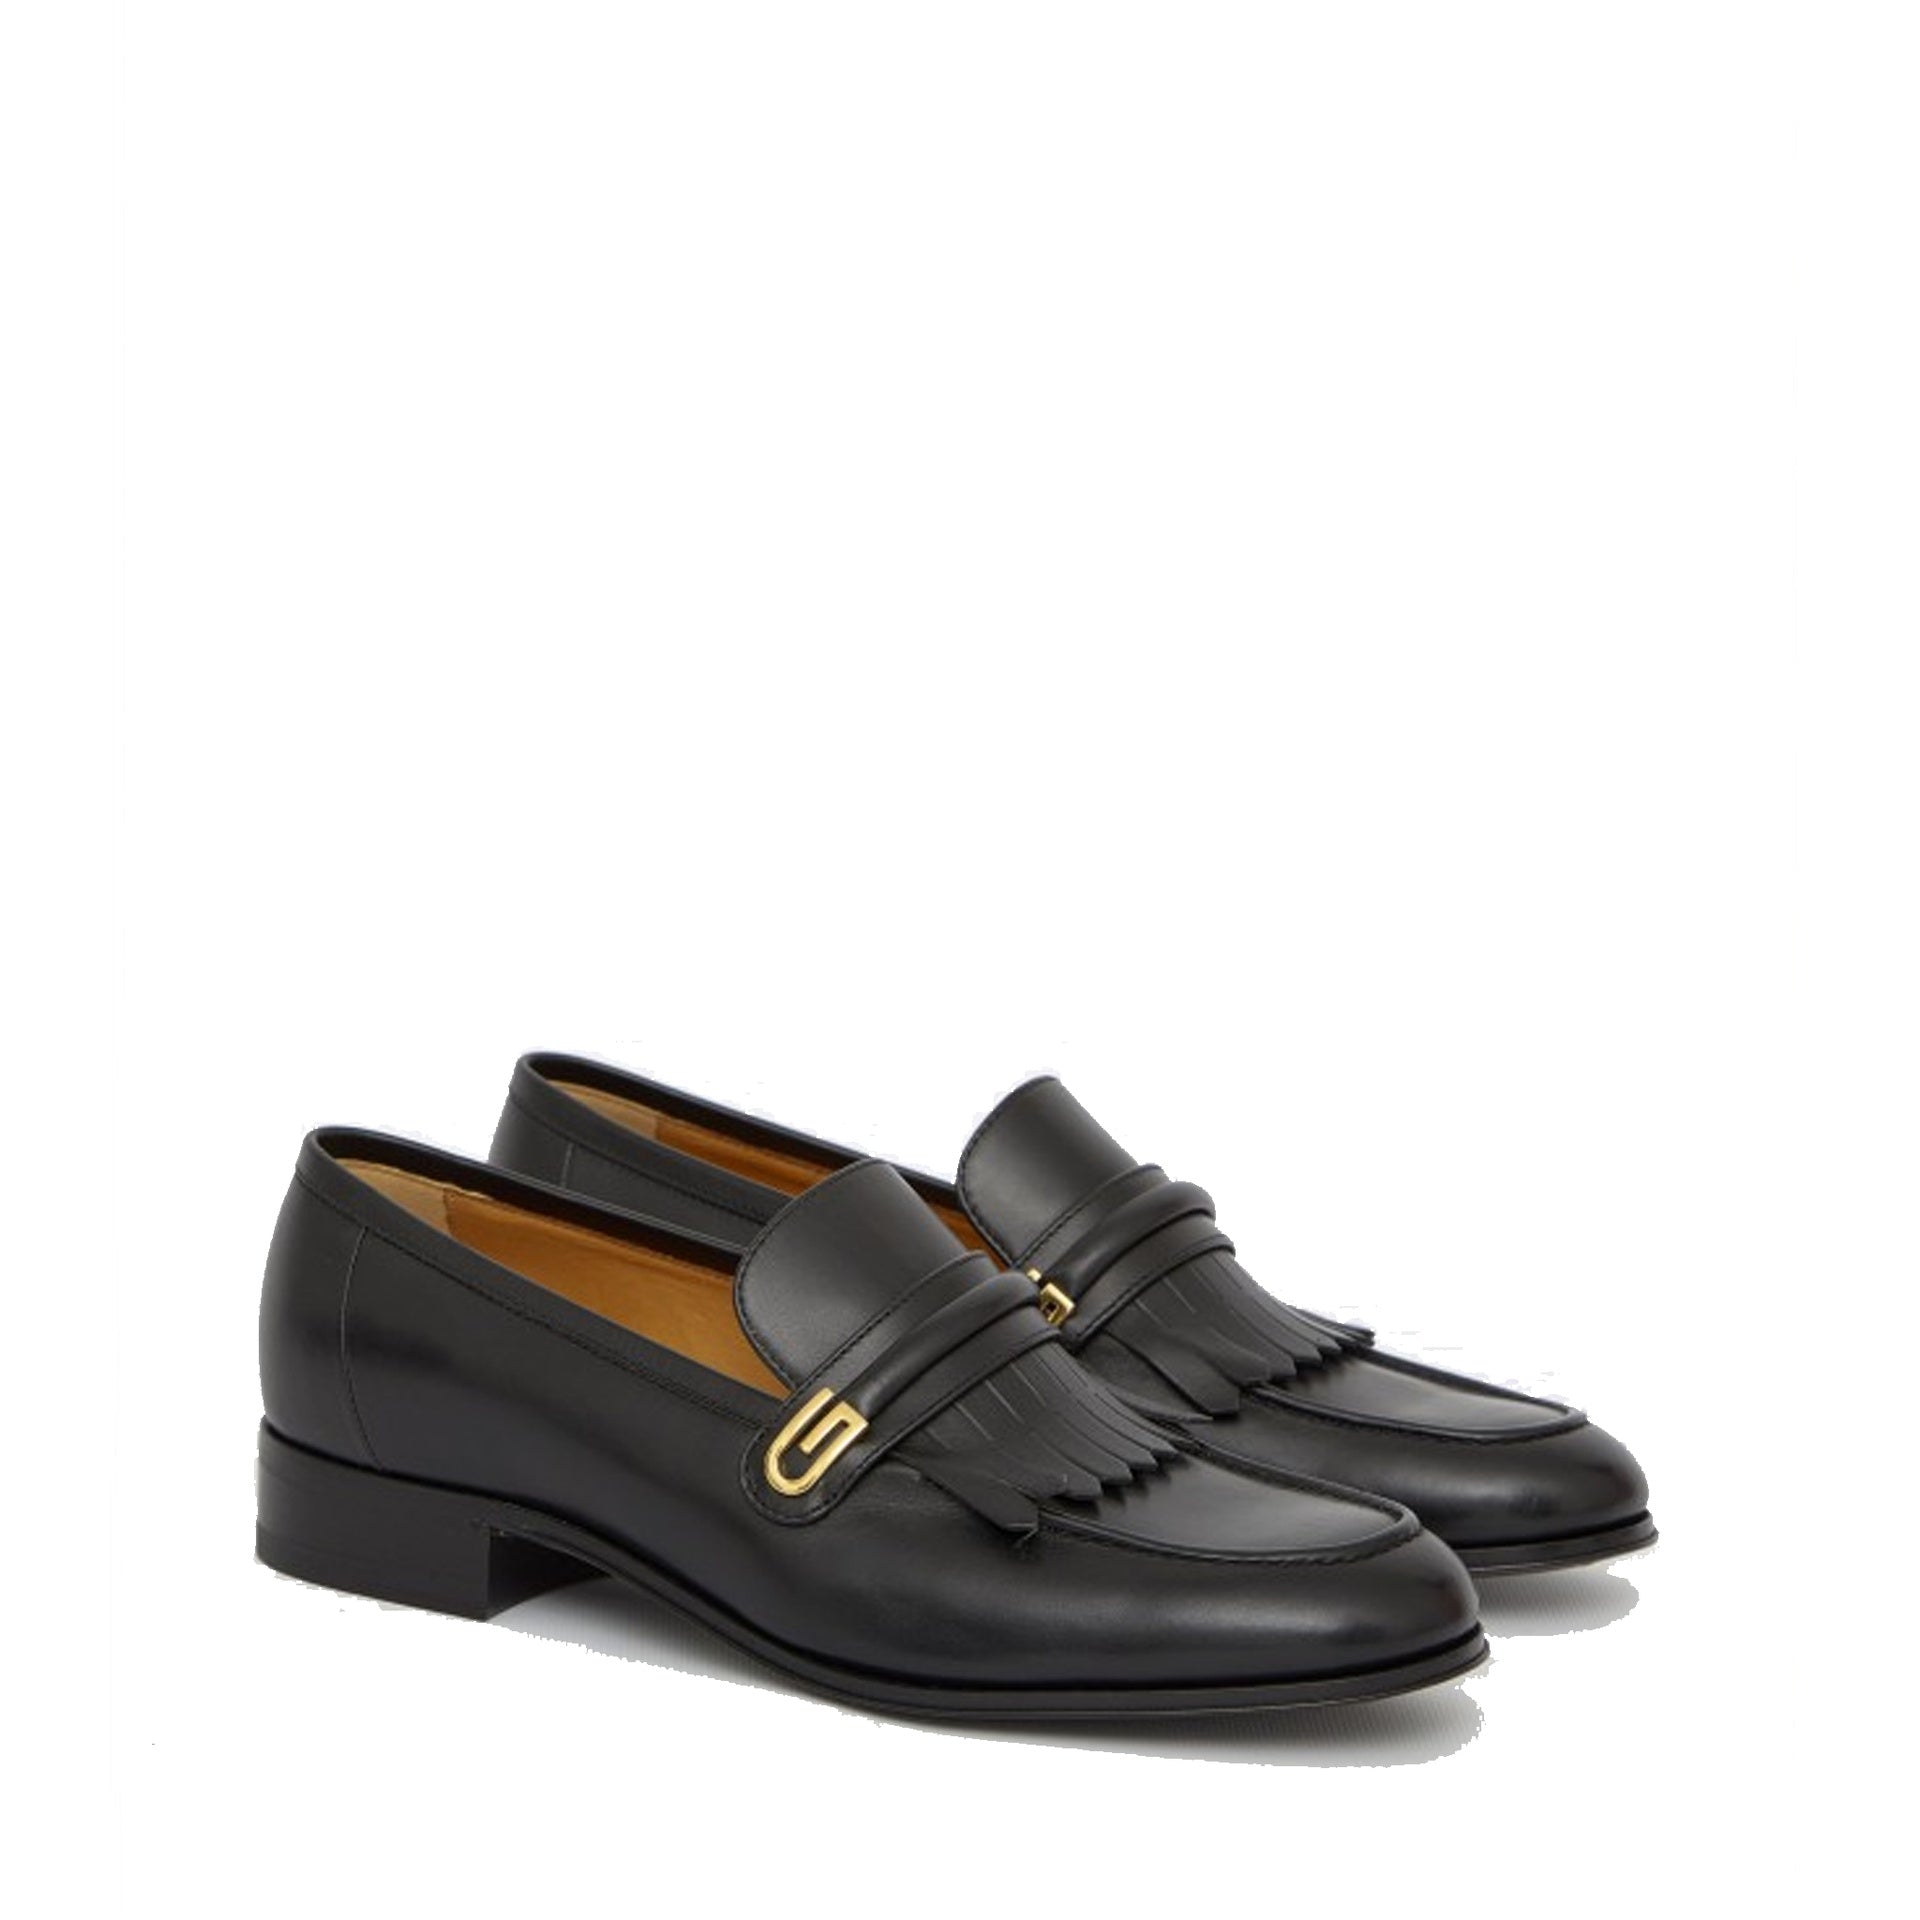 GUCCI_GUCCI_Leather_Loafers_714680_06F00_1000_Black_2.jpg